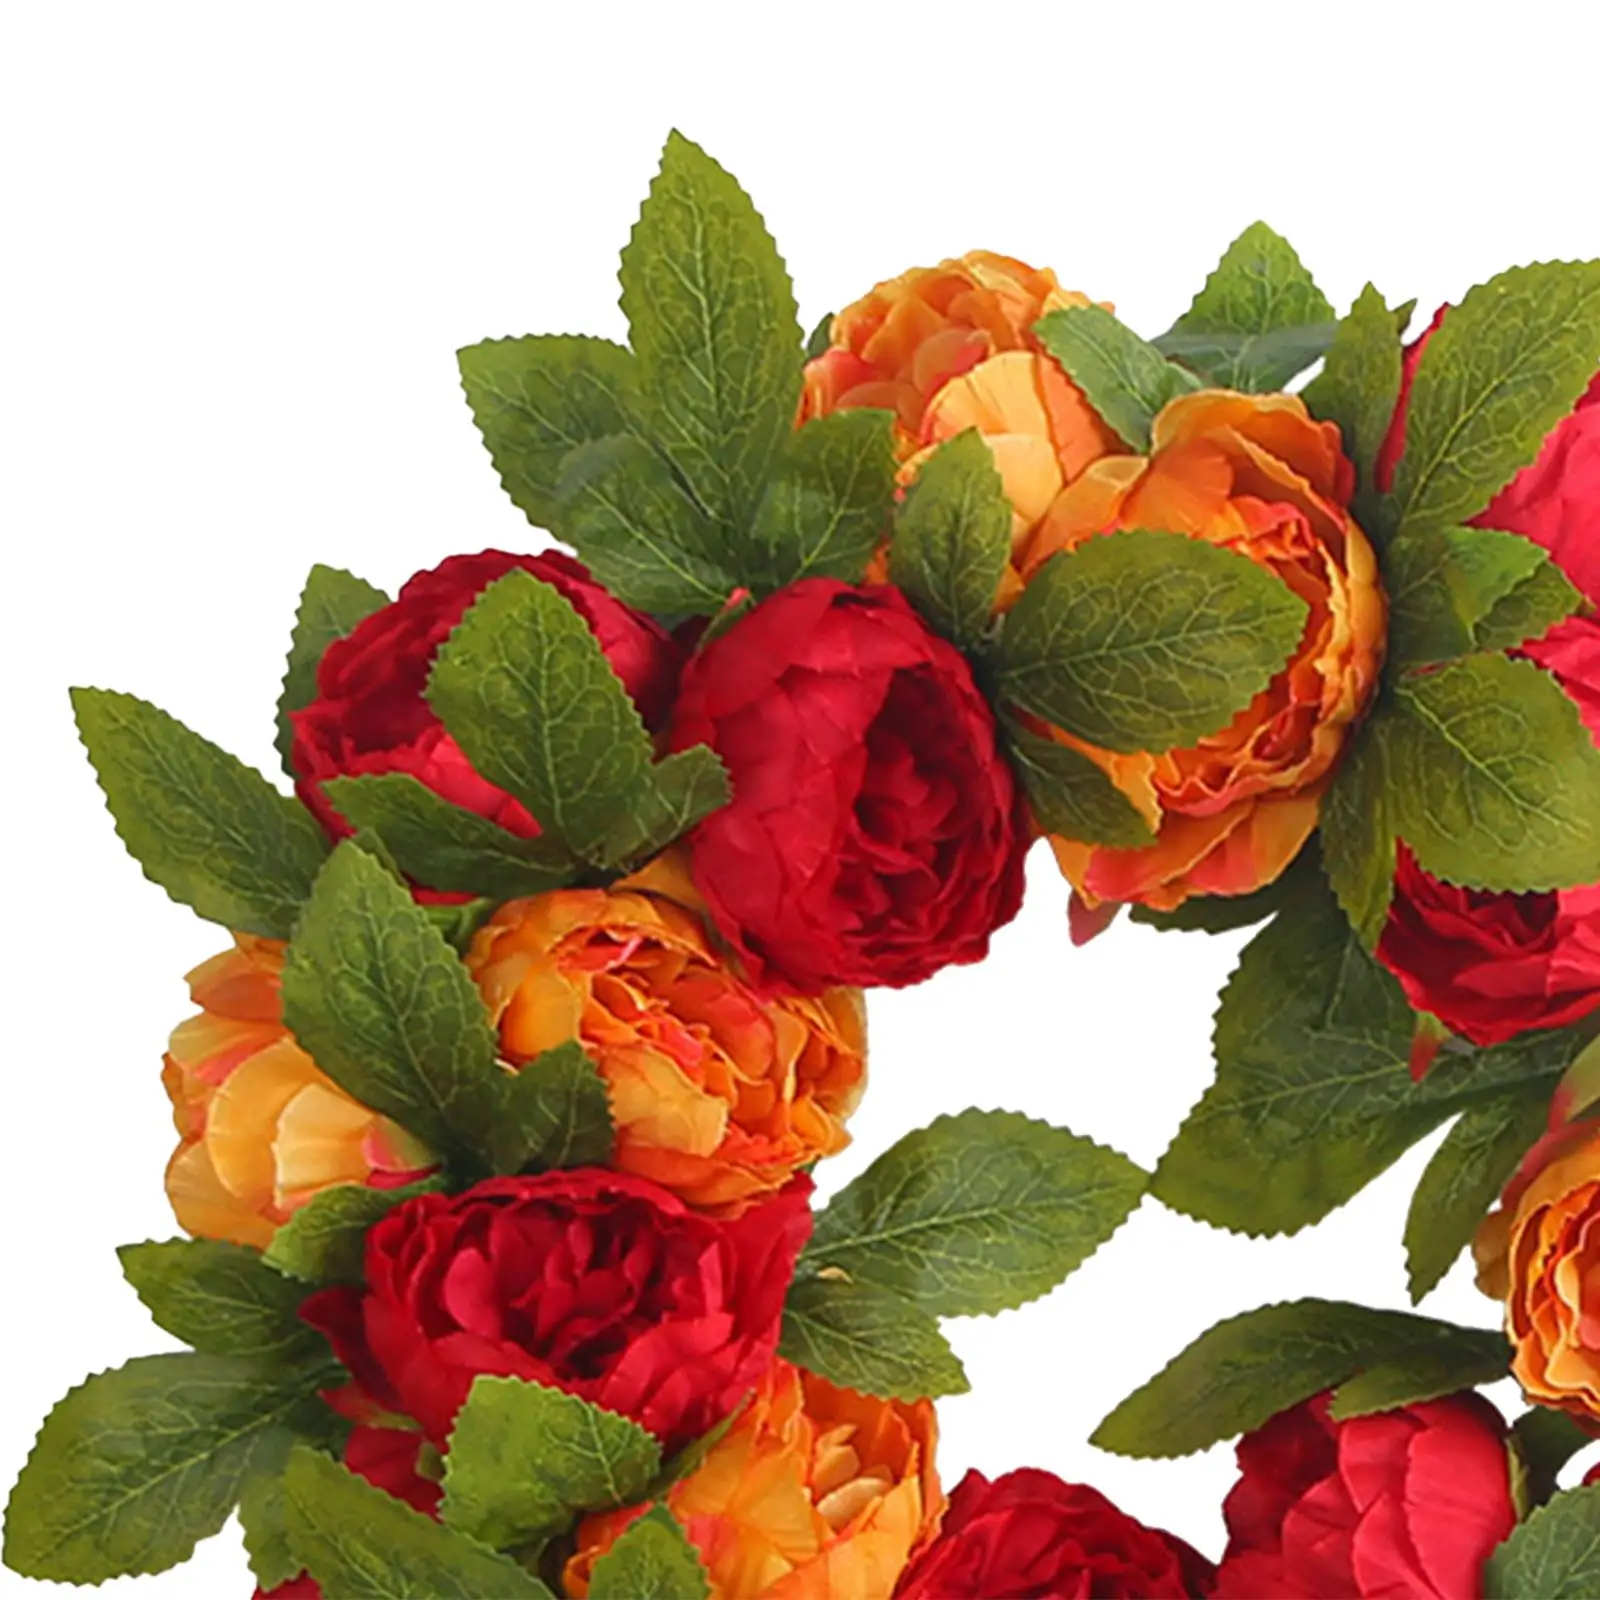 Artificial Flower Wreath 40cm Garland Round Large Wall Decor Backdrop Peony Wreaths for Front Door Festival Windows Party